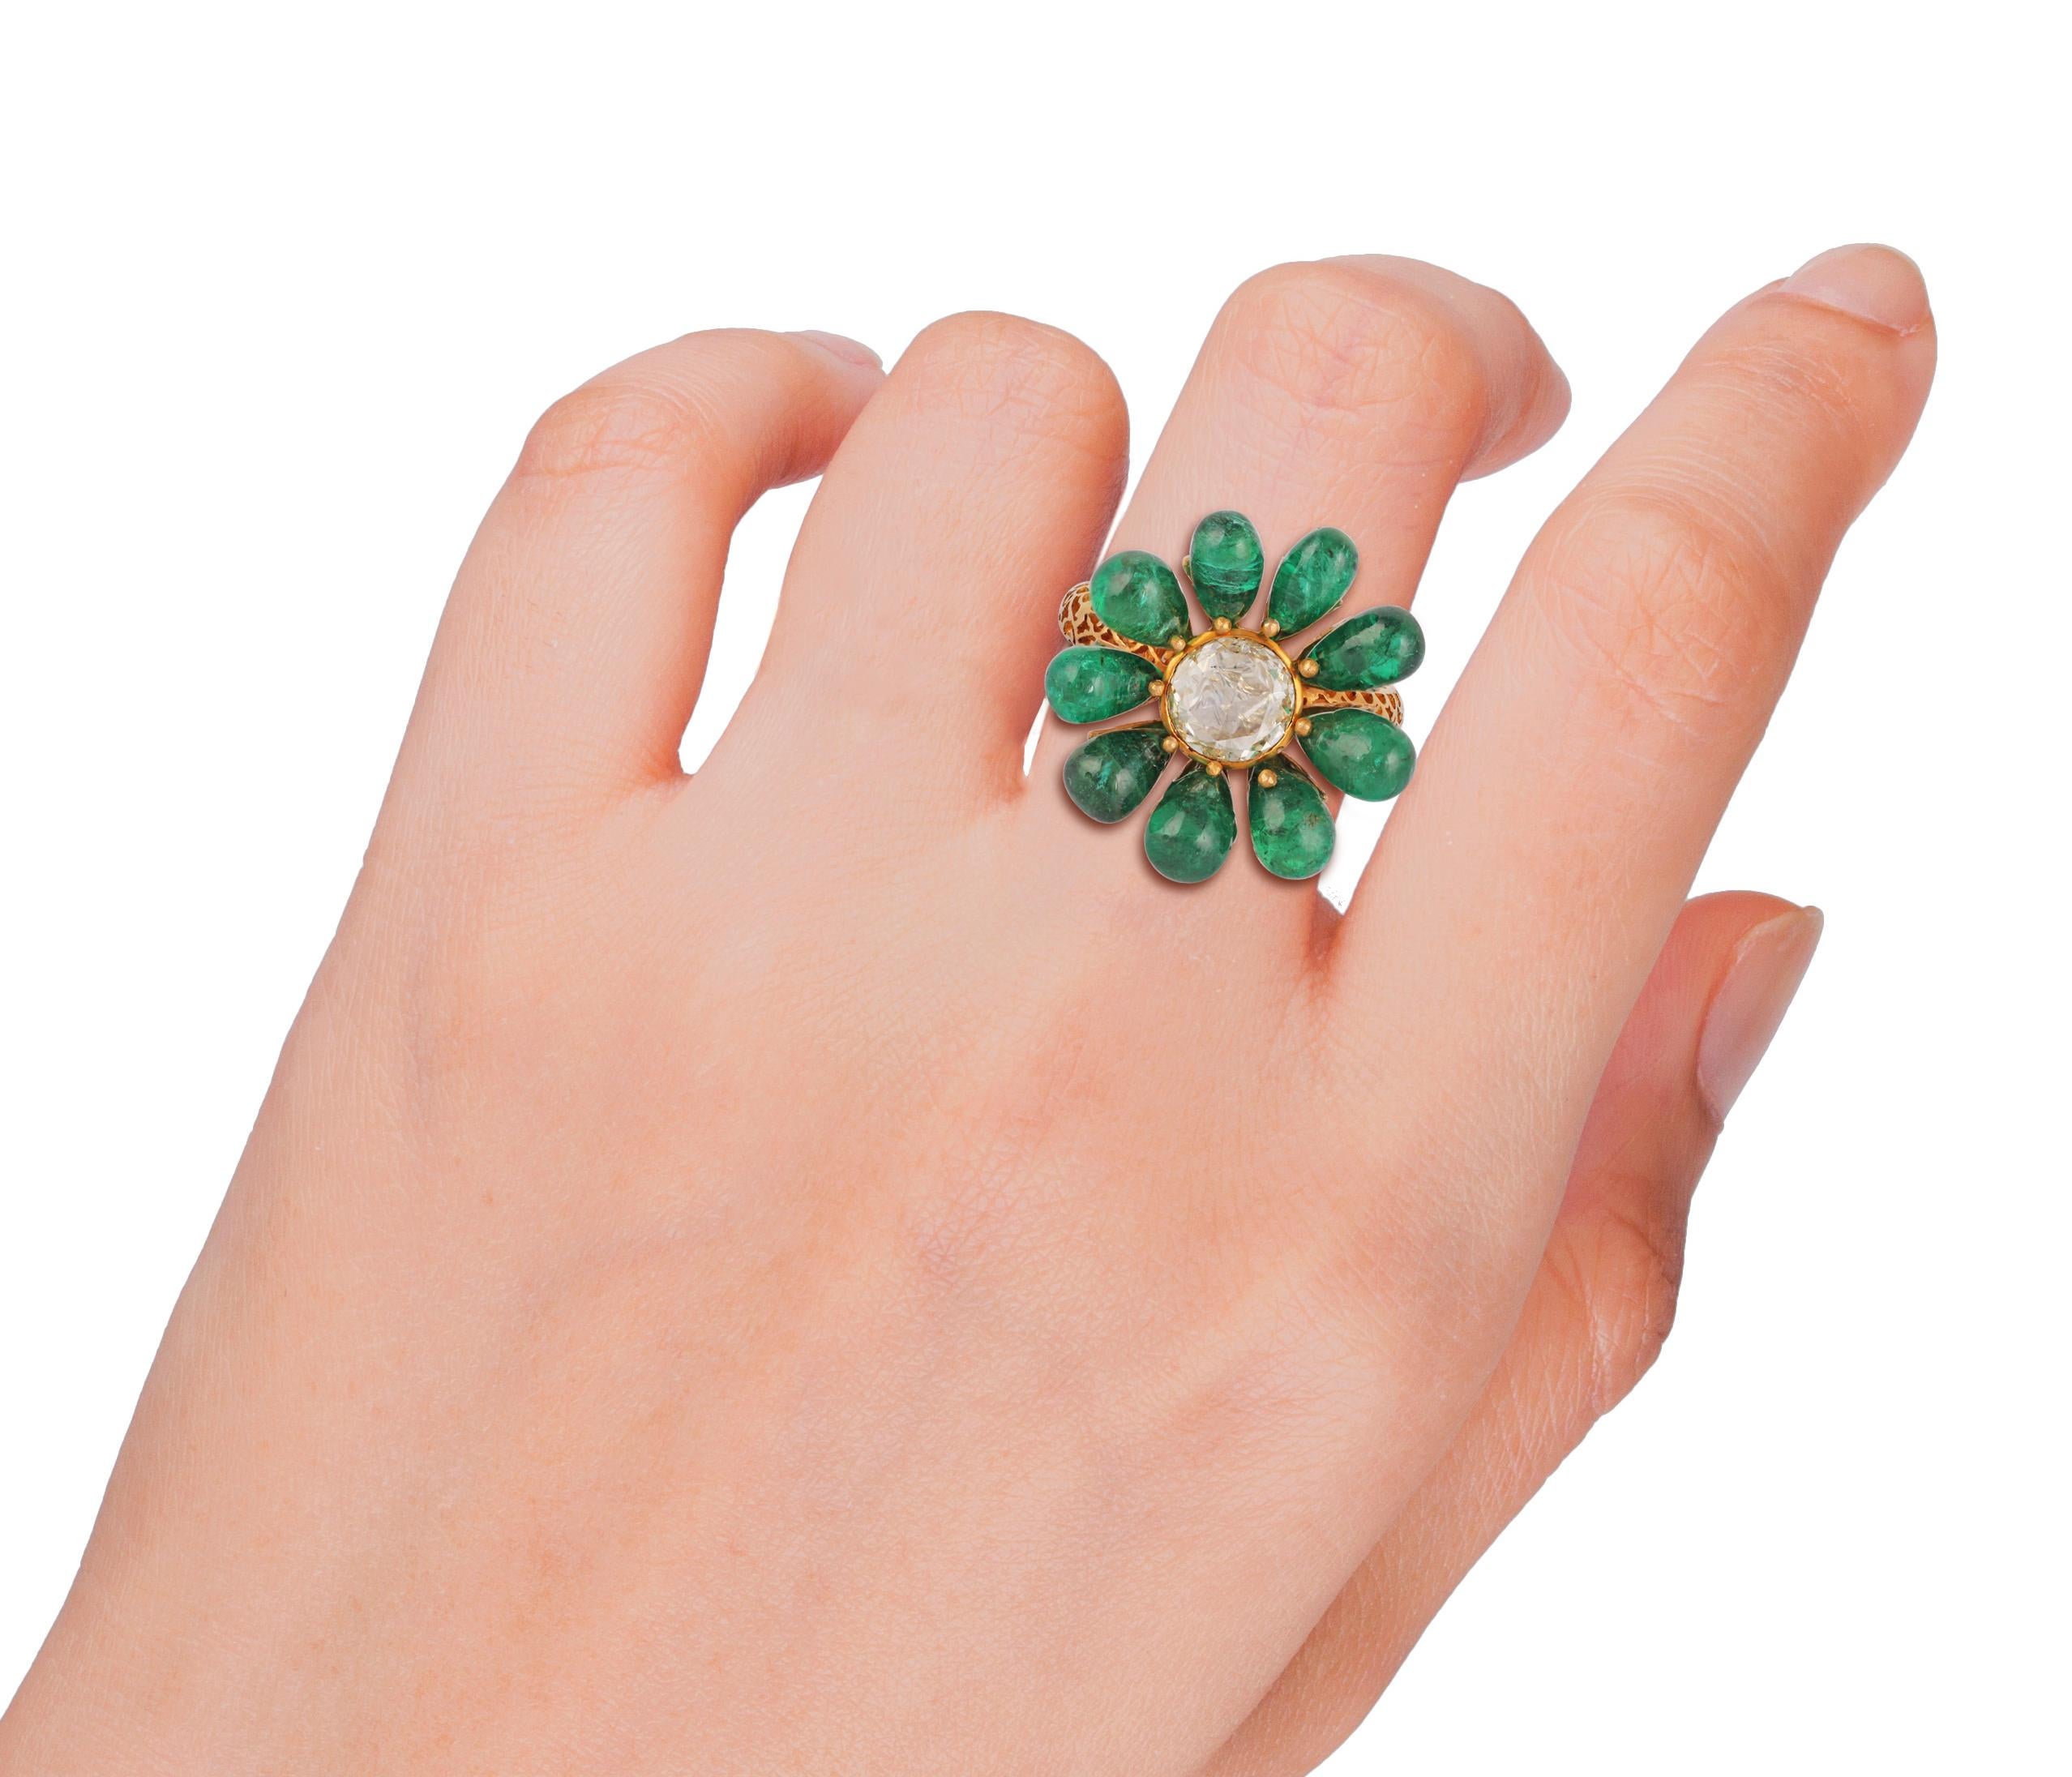 Cabochon Emerald and Diamond Ring Studded in 18 Karat Yellow Gold